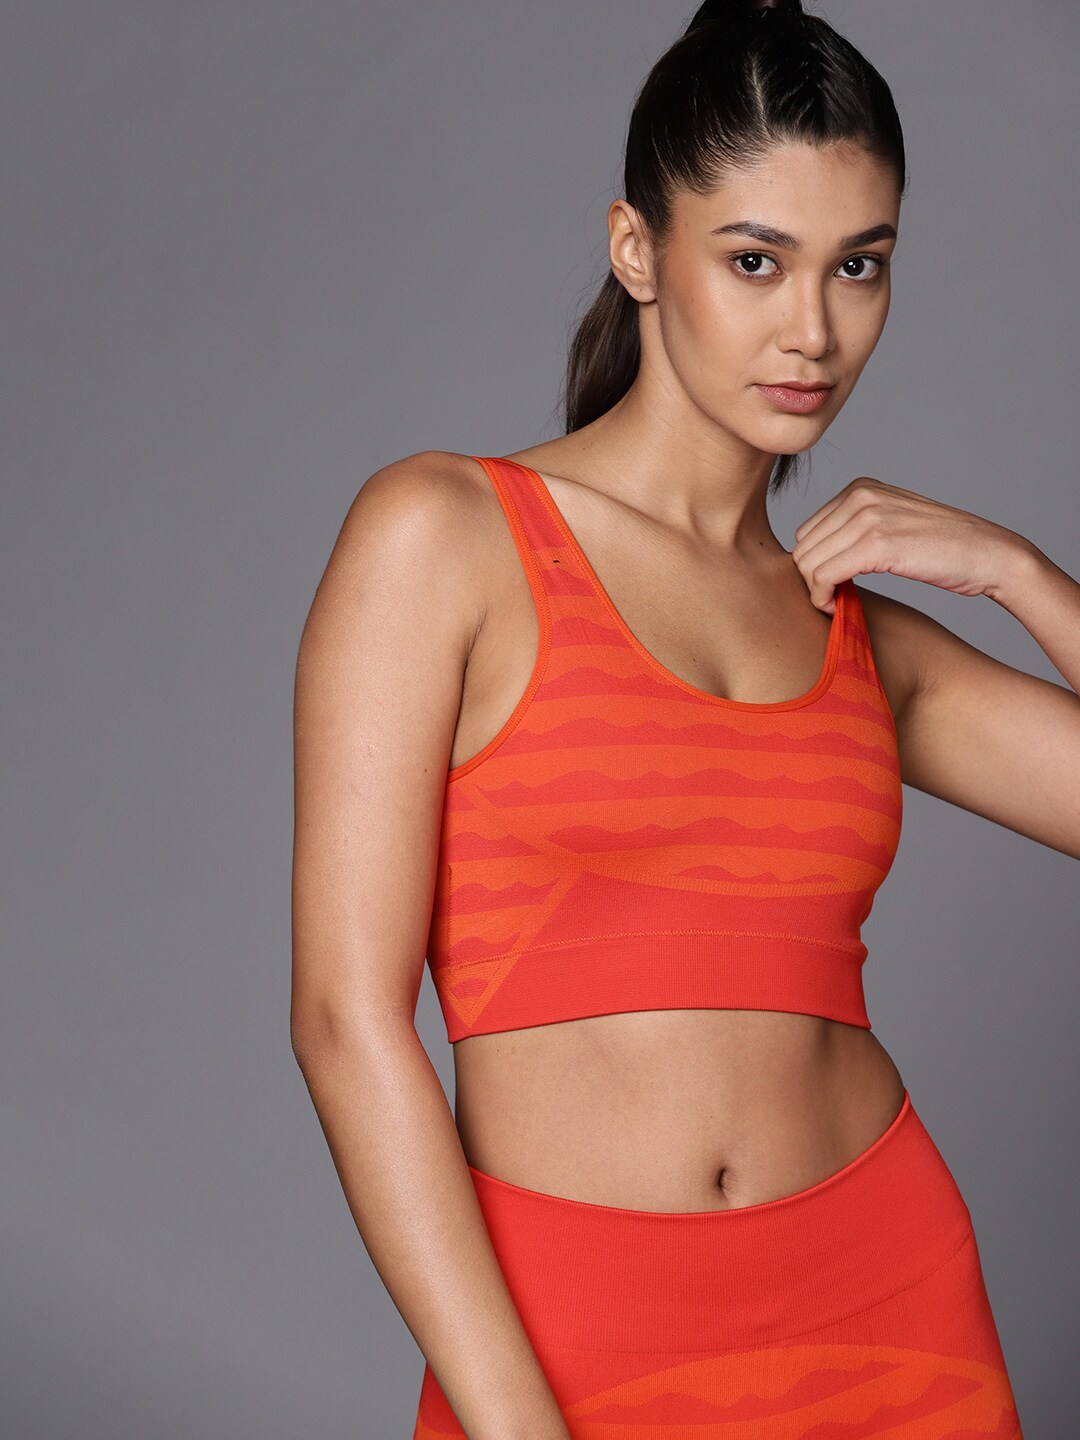 ADIDAS Orange & Red Abstract Print MMK Aeroknit Light-Support Training Sports Bra Price in India